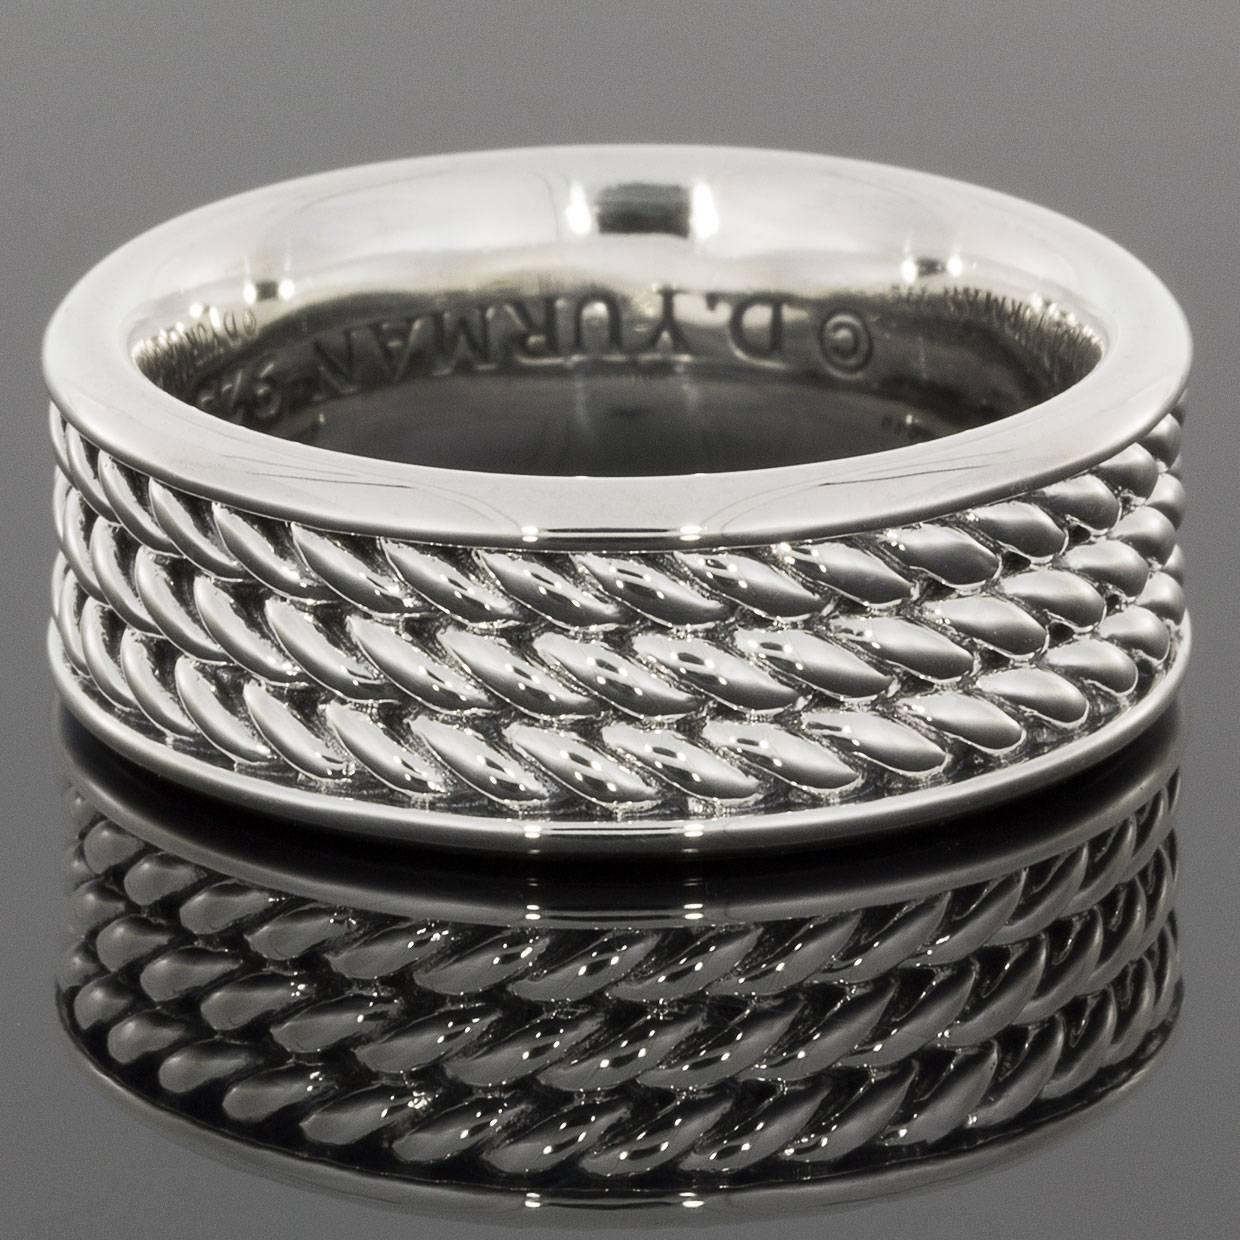 David Yurman's cable style jewelry has become his signature, the unifying element of every collection. This timeless David Yurman men's ring is from the Maritime Collection & features this iconic cable design. The ring has 3 sterling silver, cable